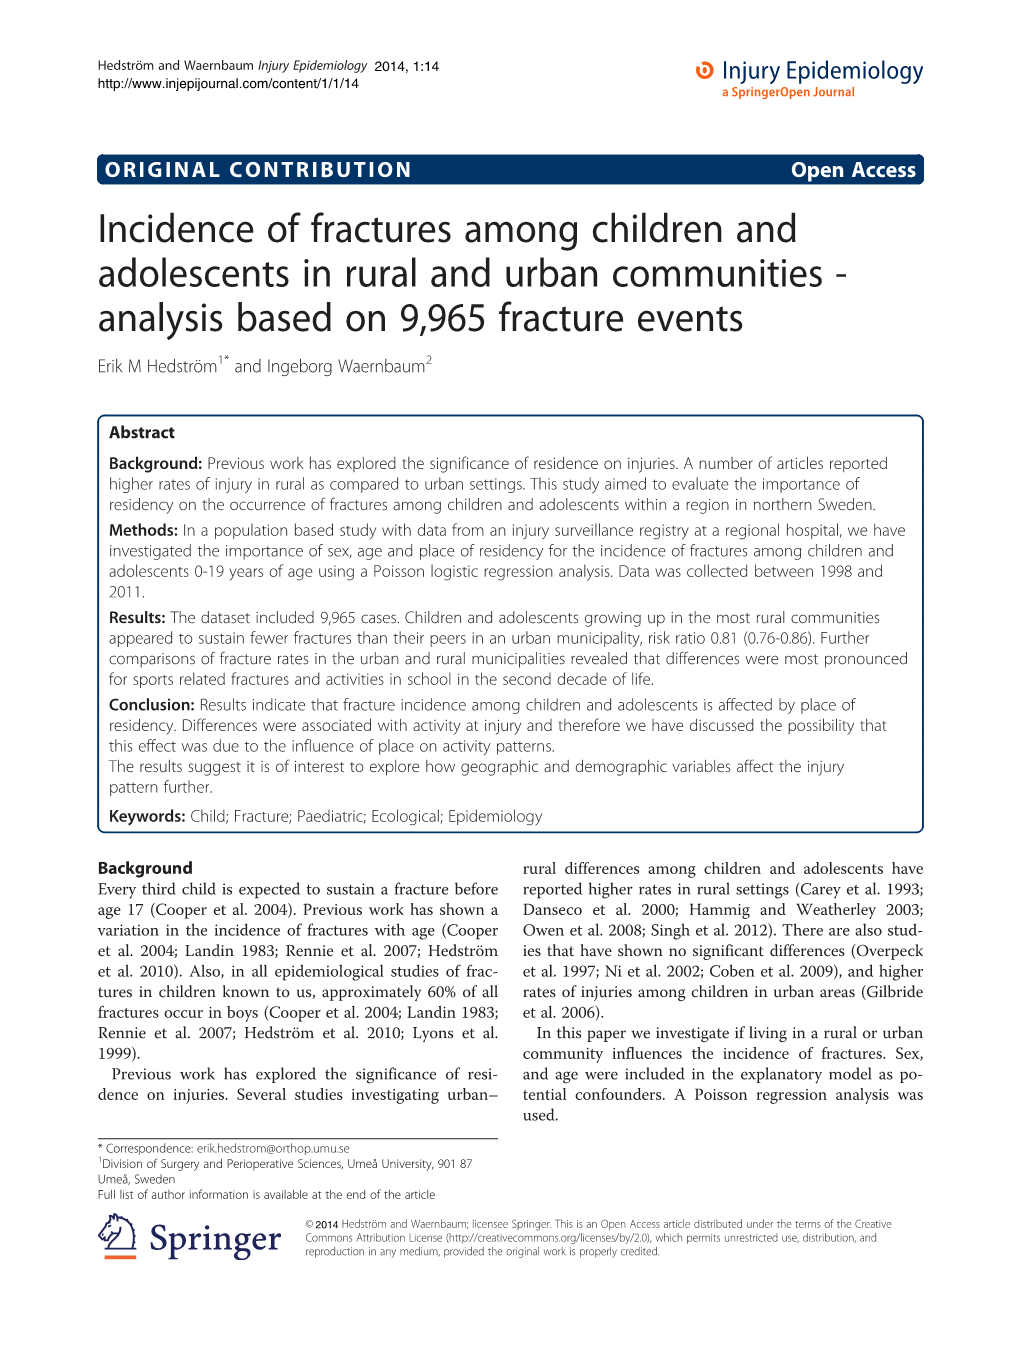 Incidence of Fractures Among Children and Adolescents In